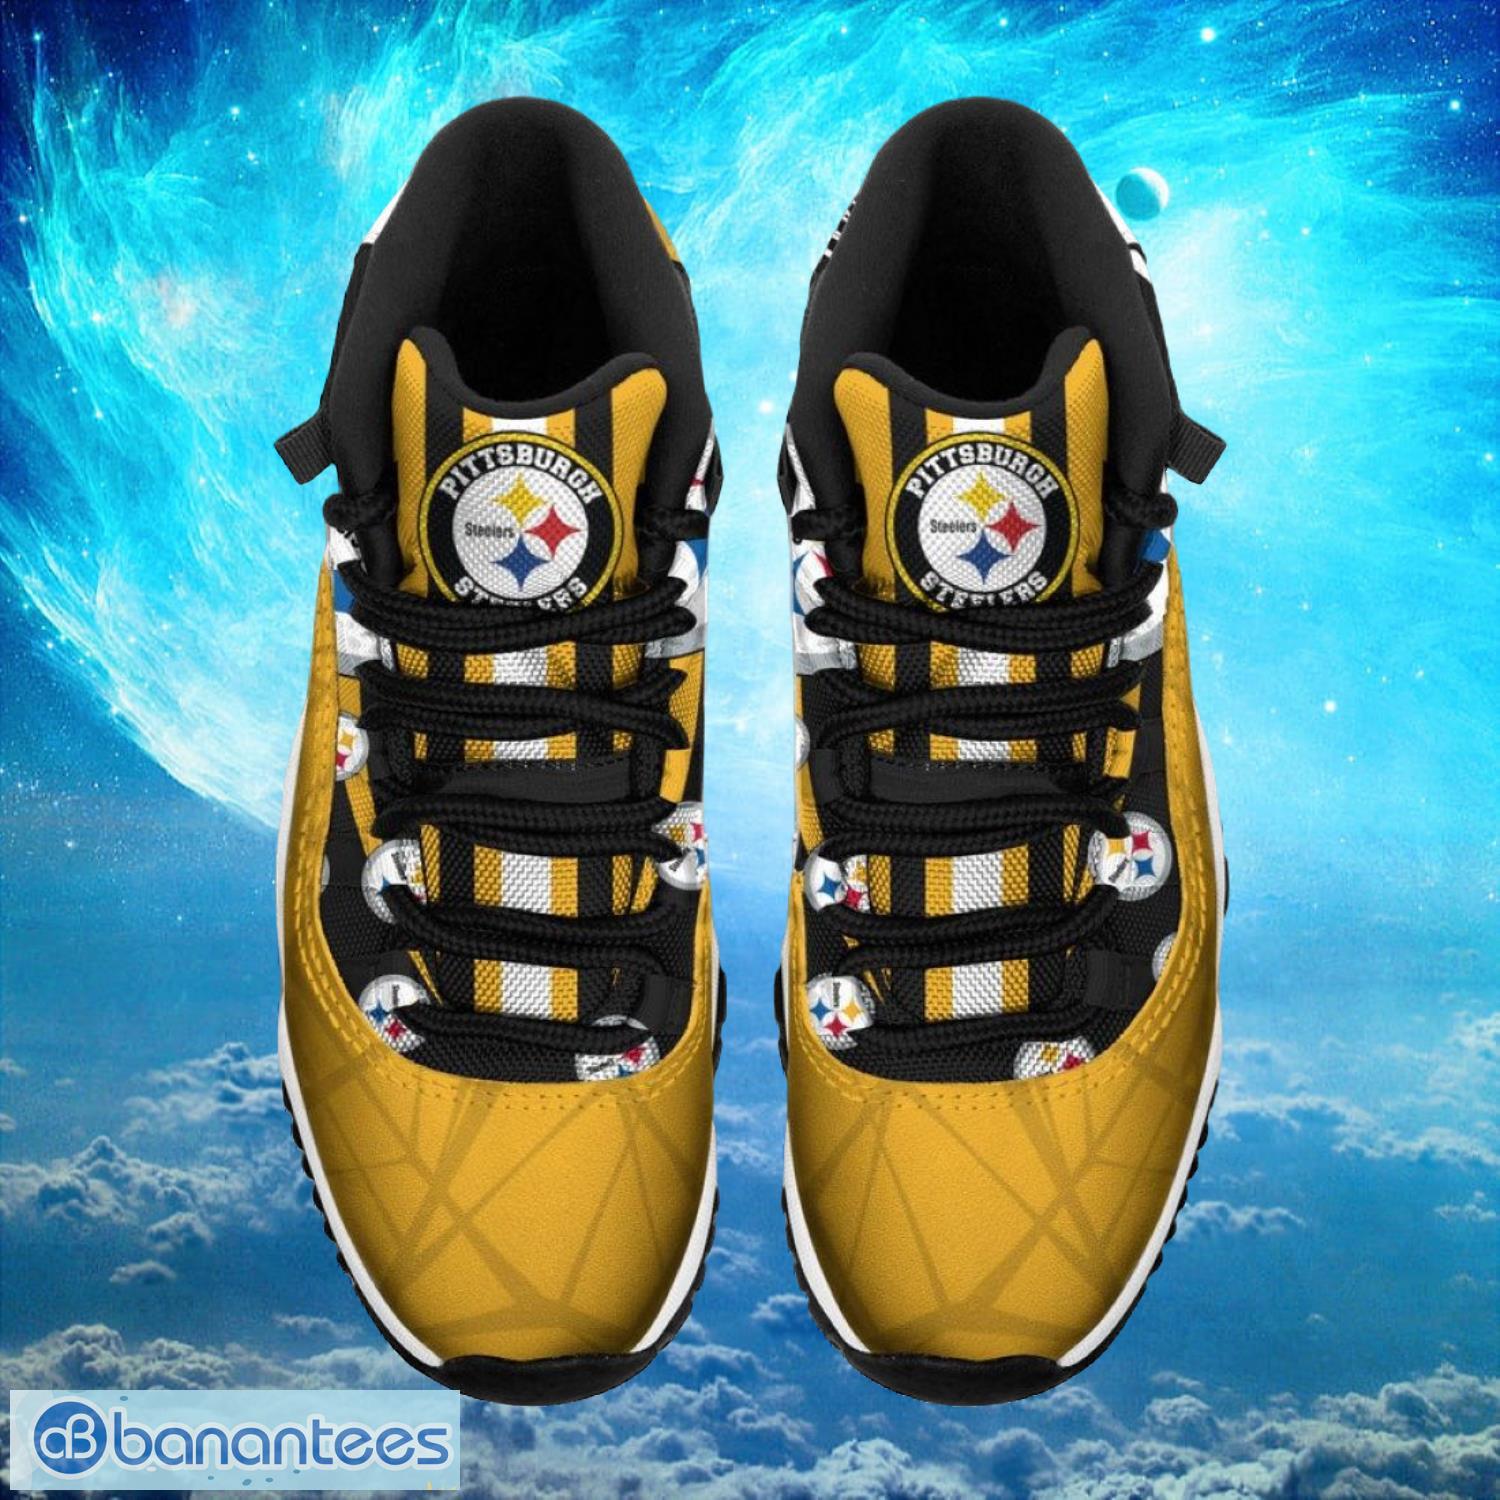 Pittsburgh Steelers NFL Air Jordan 11 Sneakers Shoes Gift For Fans Product Photo 2